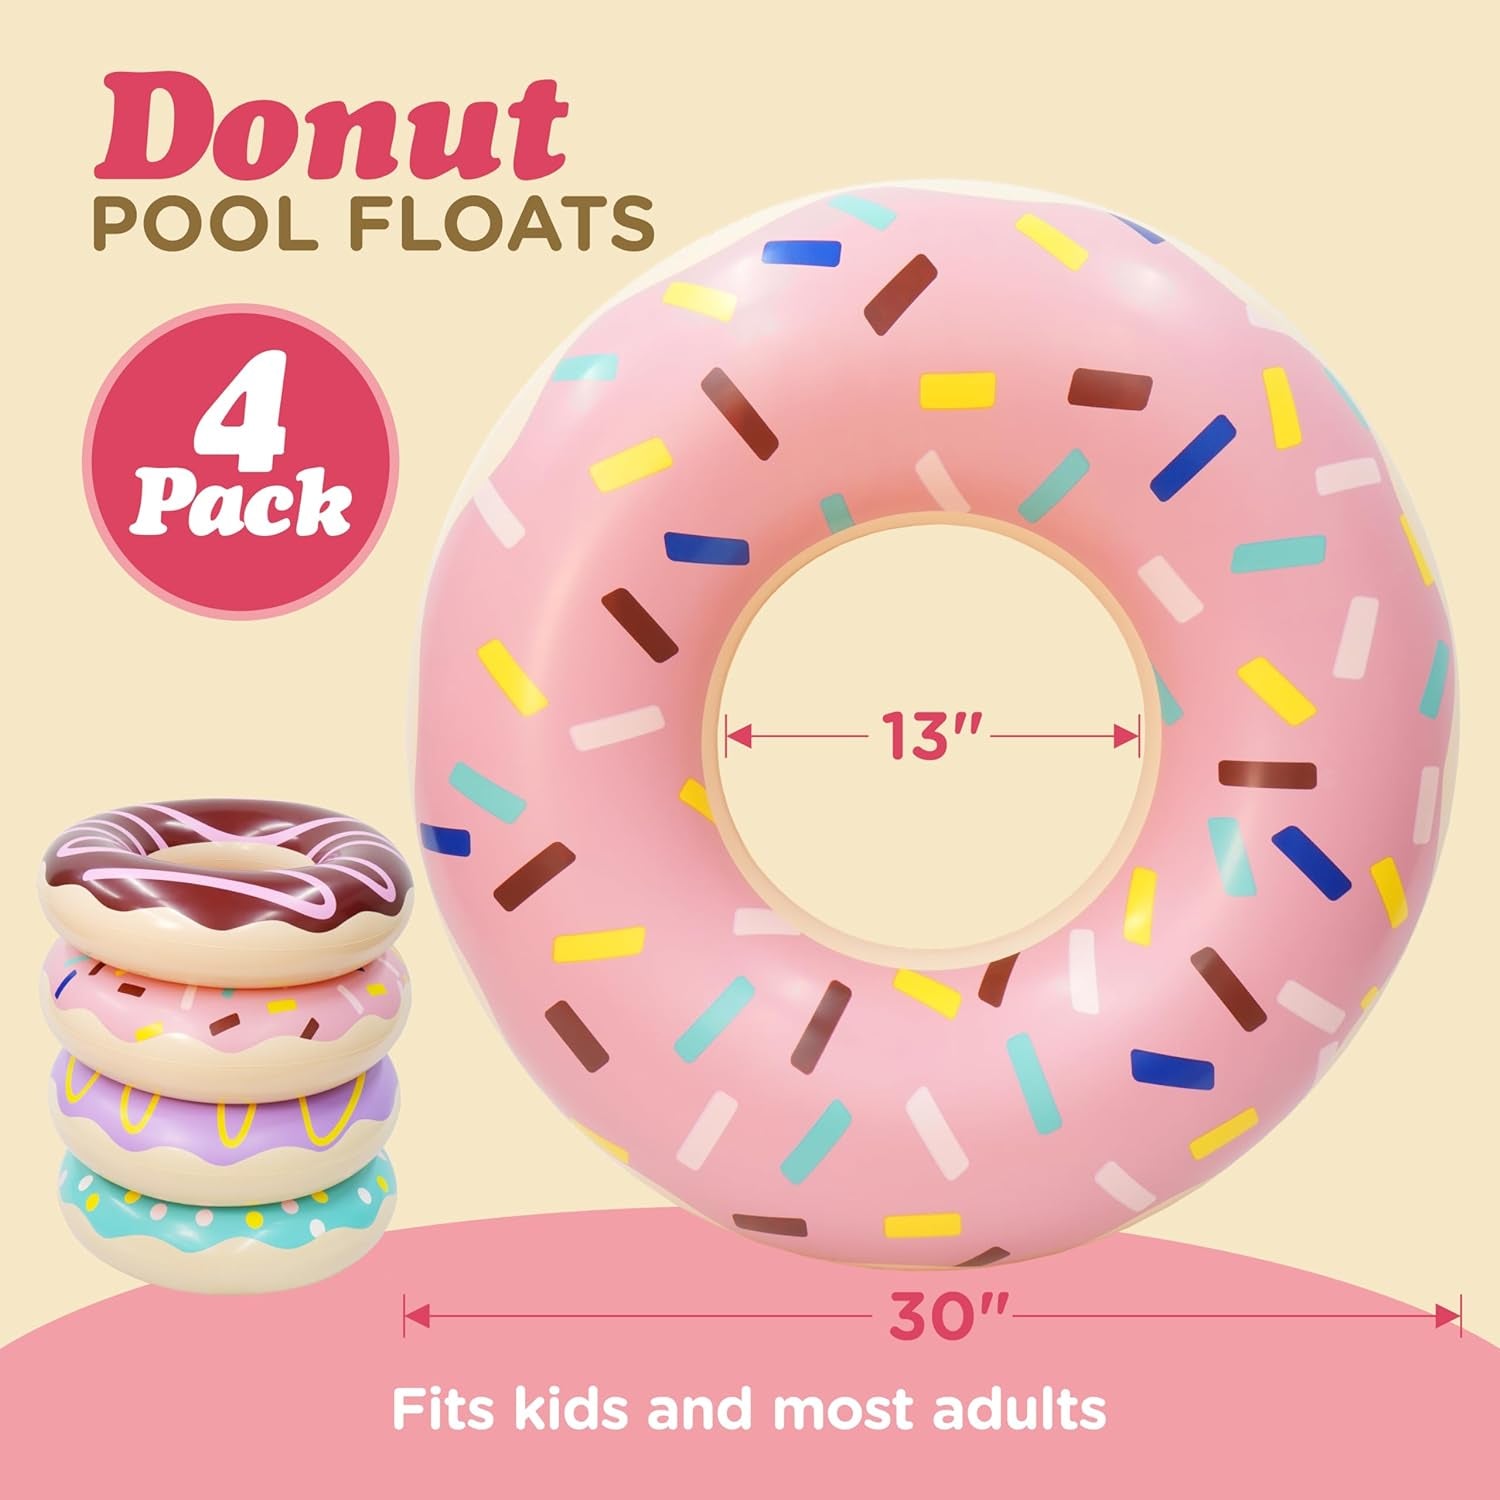 4 Pack Donut Pool Floats for Kids & Adults 30" Swim Rings Tubes Floaties for Swimming Pool, Donut Inflatable for Party Decorations Beach Toys by